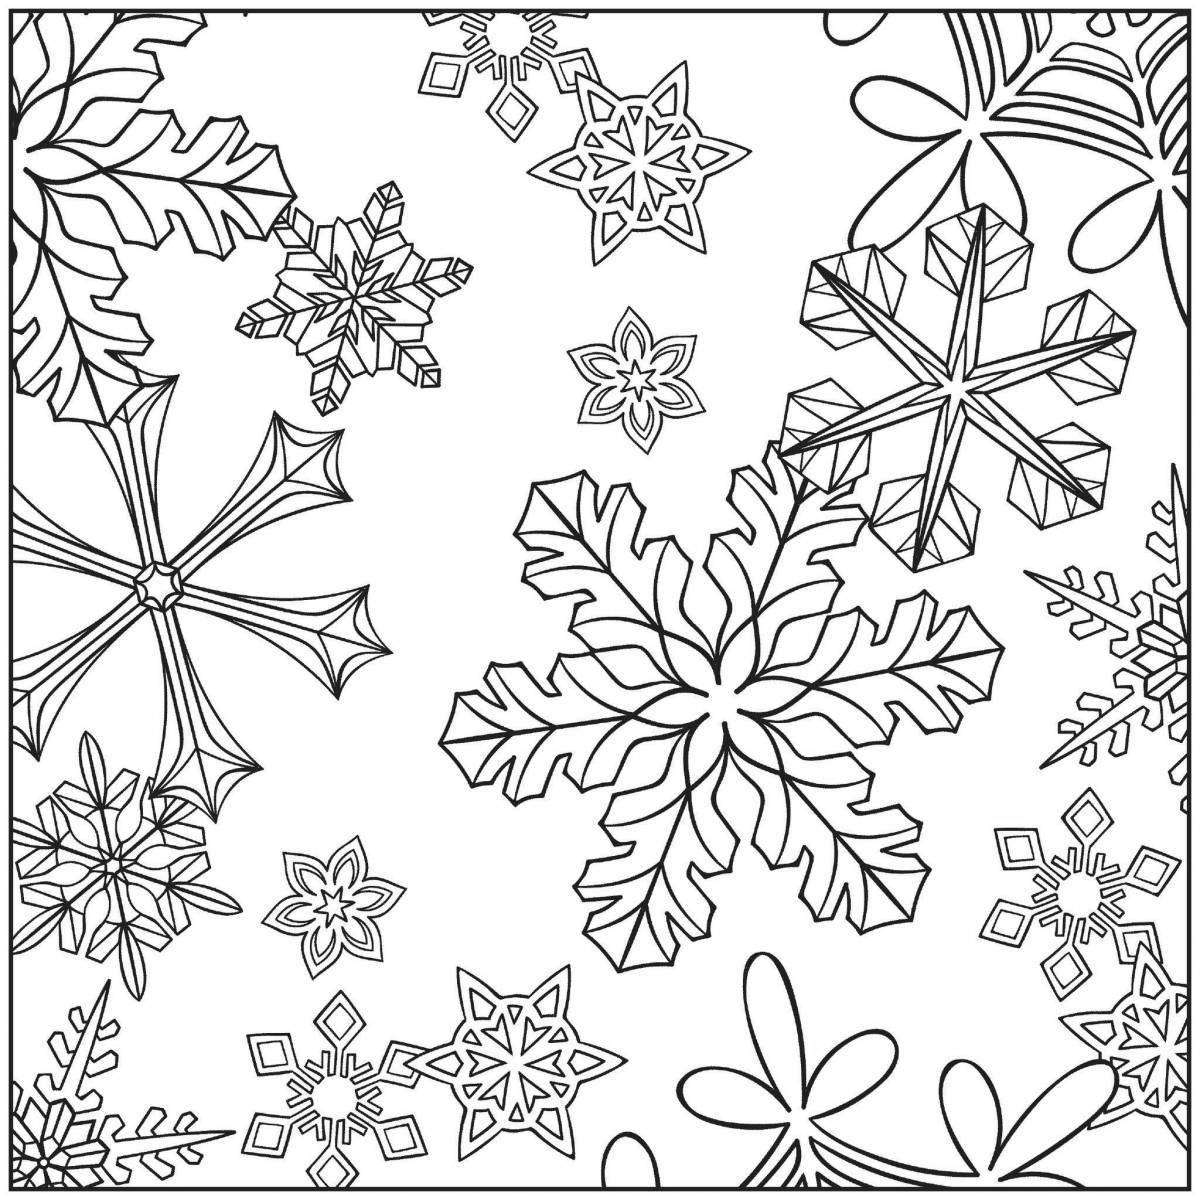 Gorgeous frosty window coloring patterns for kids